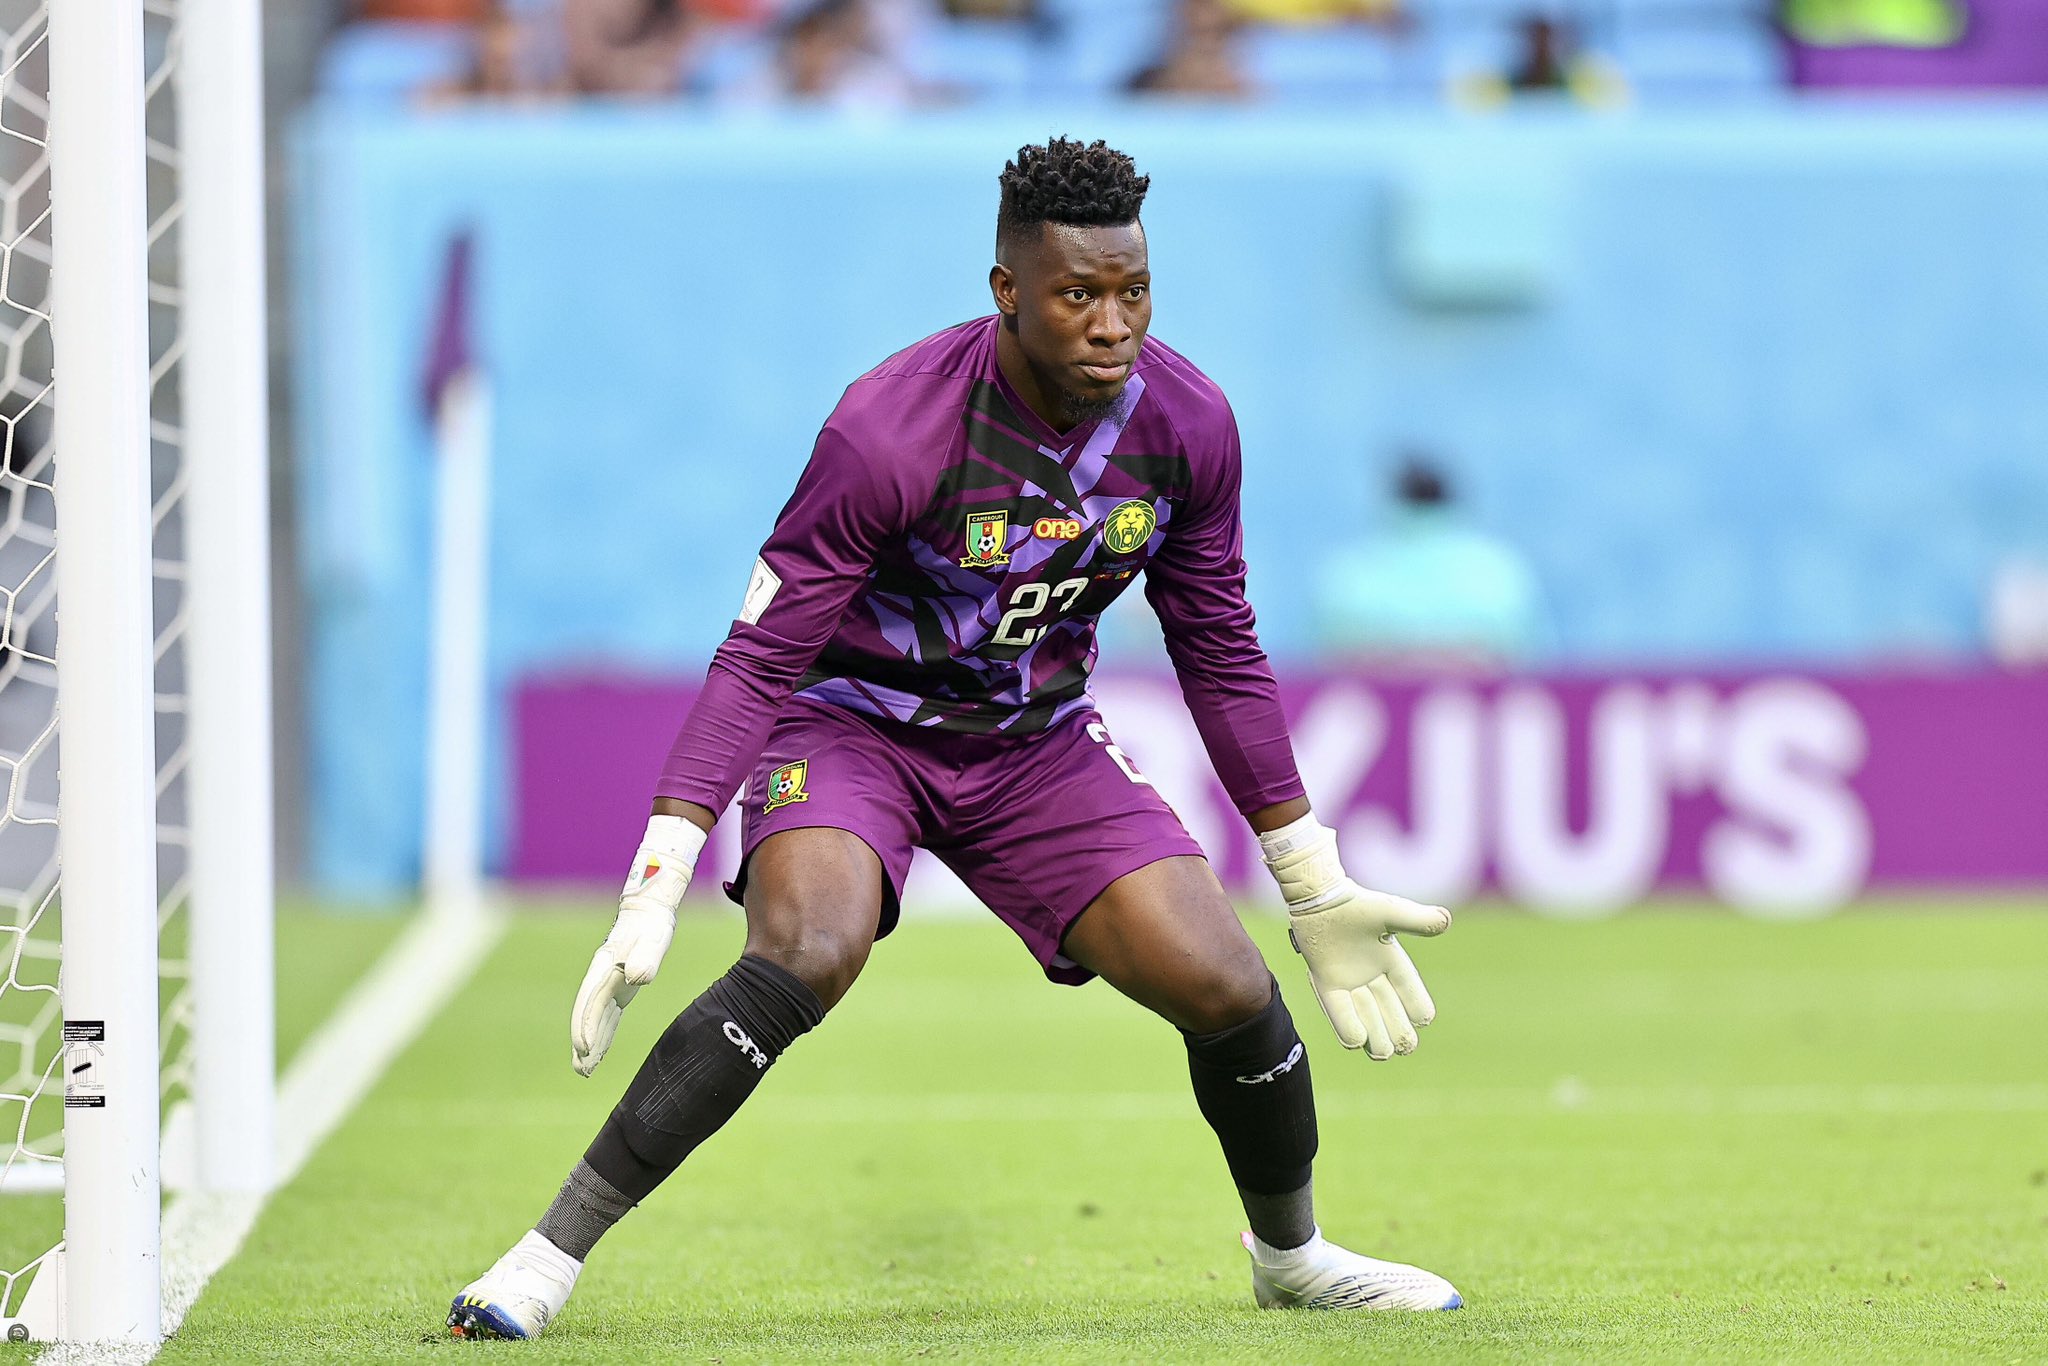 FIFA World Cup: Cameroon goalkeeper Andre Onana retires from international  career after FIFA WC snub, insists 'Cameroon comes before any person or  player' - Check out